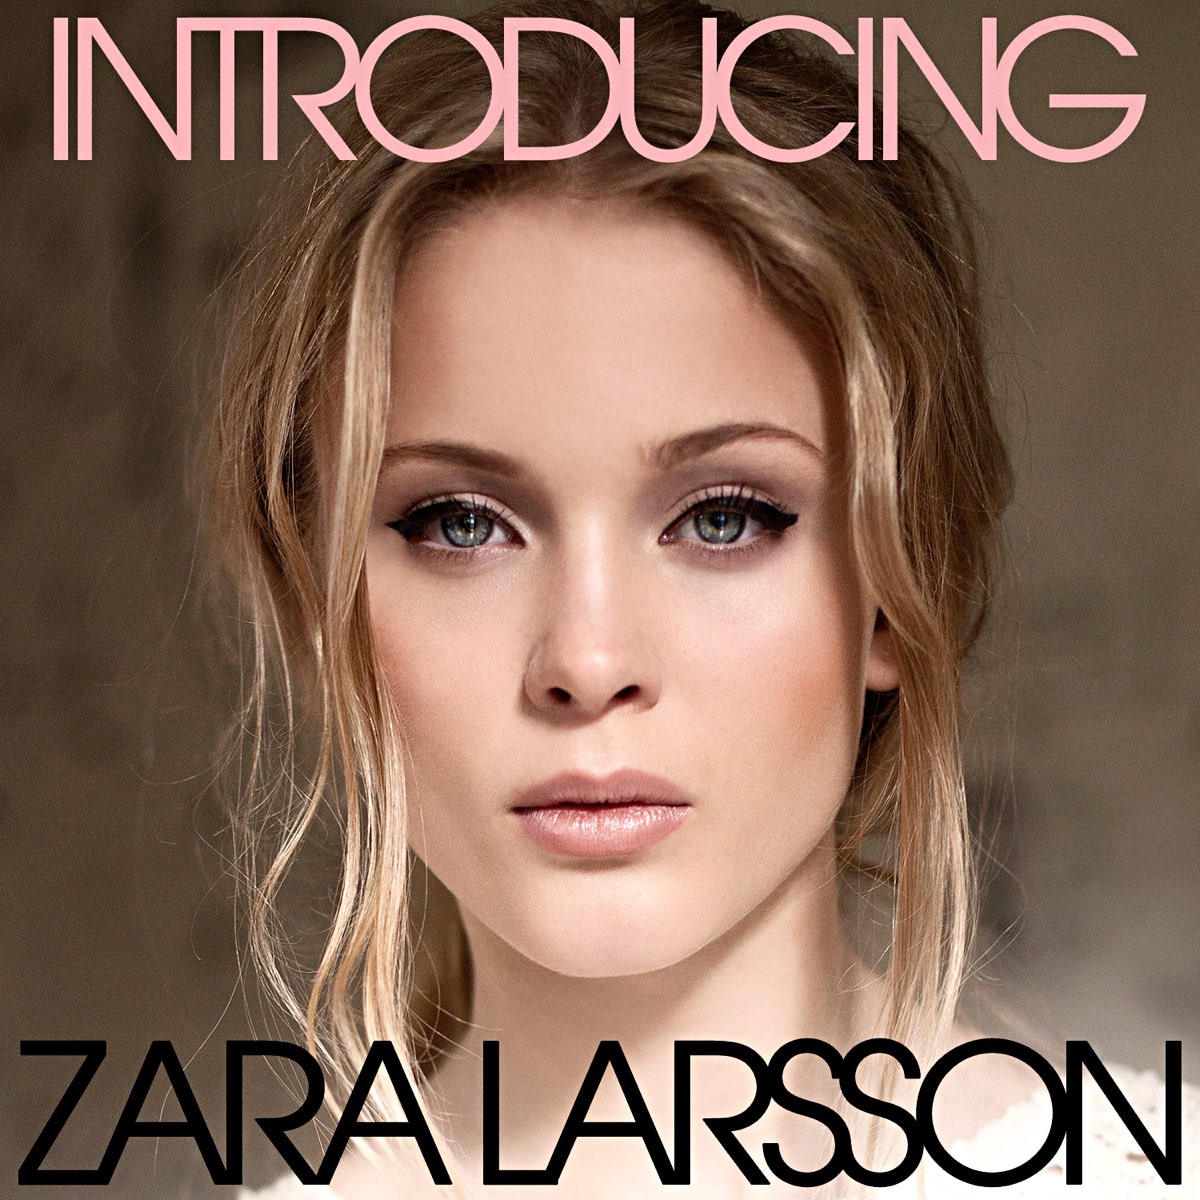 Introducing - EP by Zara Larsson on Apple Music